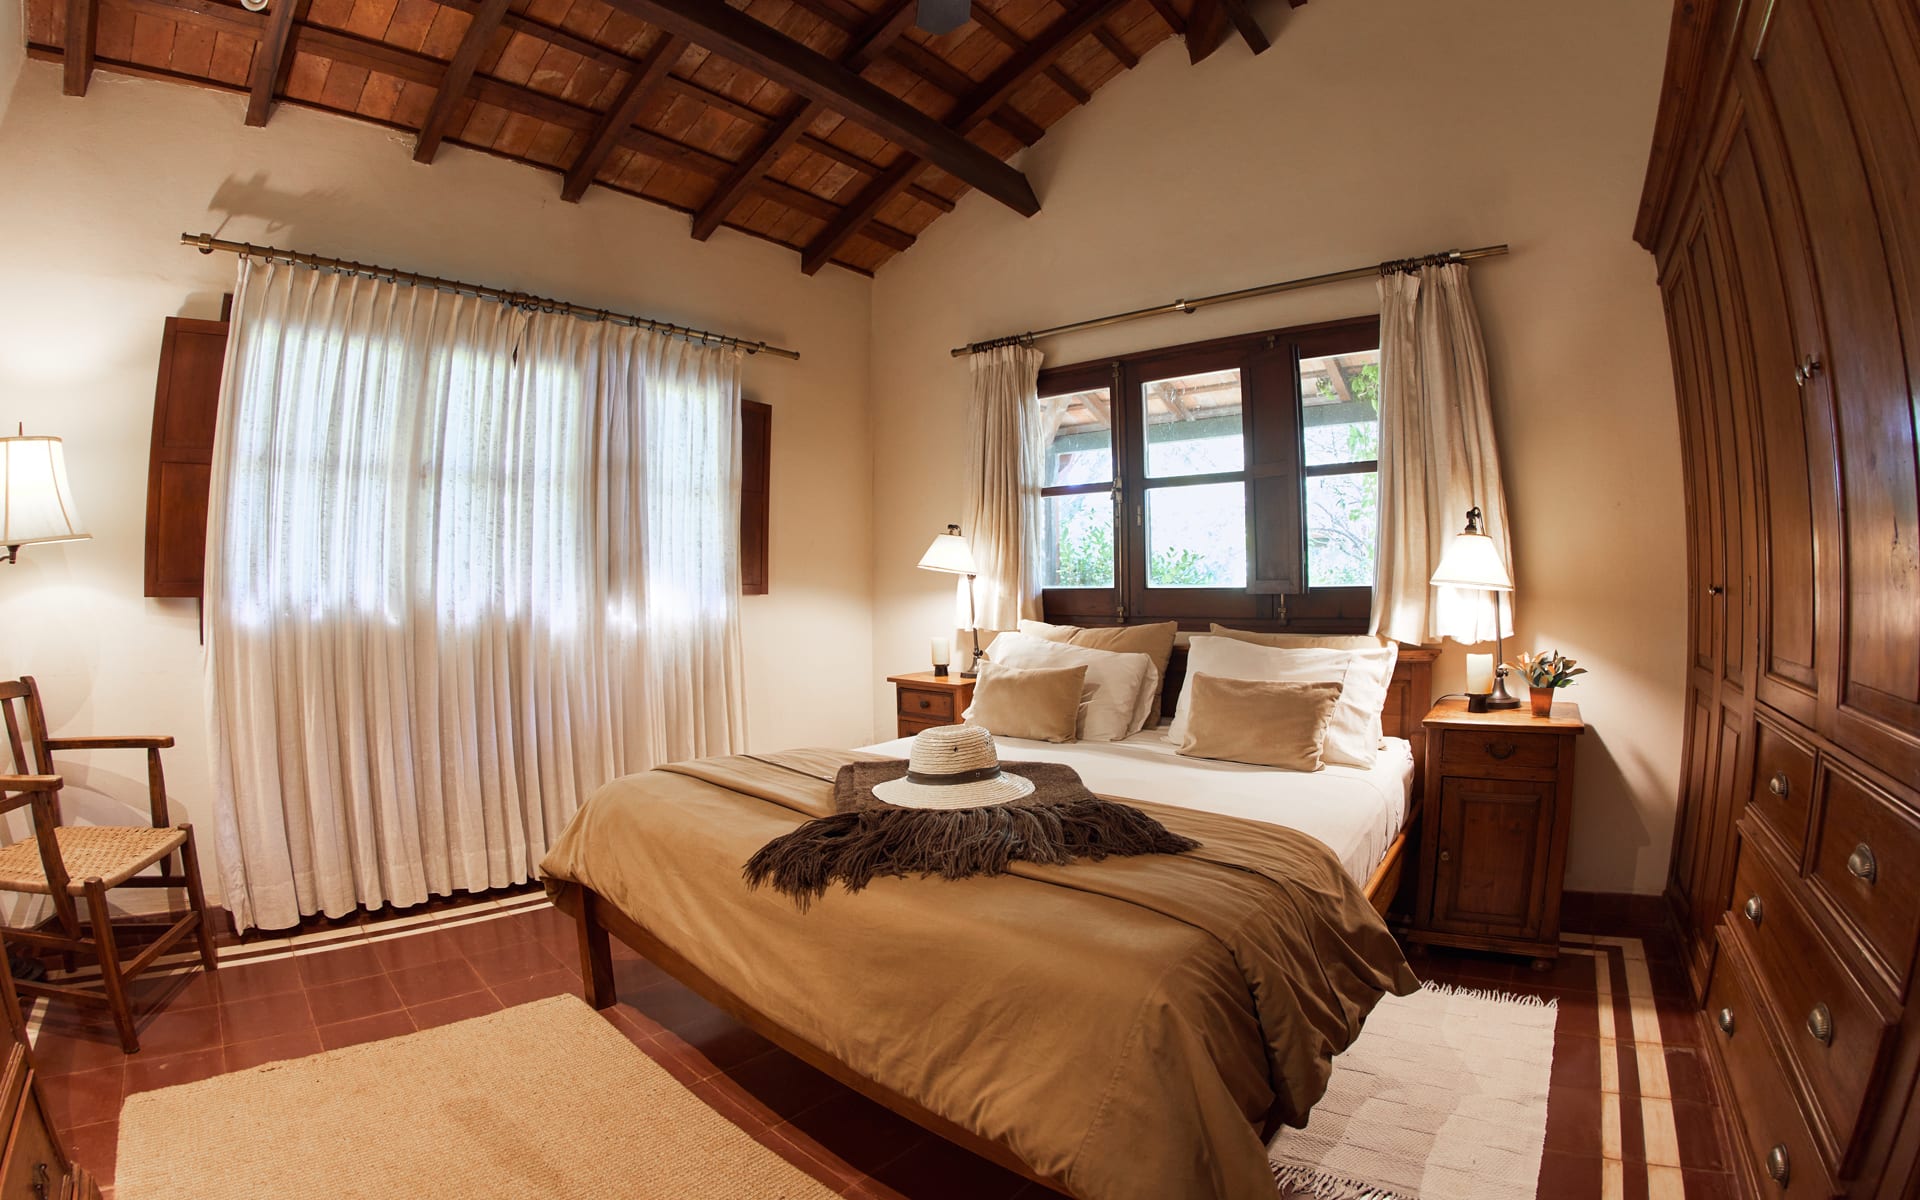 Rincon del Socorro has a down-to-earth aesthetic in its bedrooms, with a double bed surrounded by wooden furniture. 